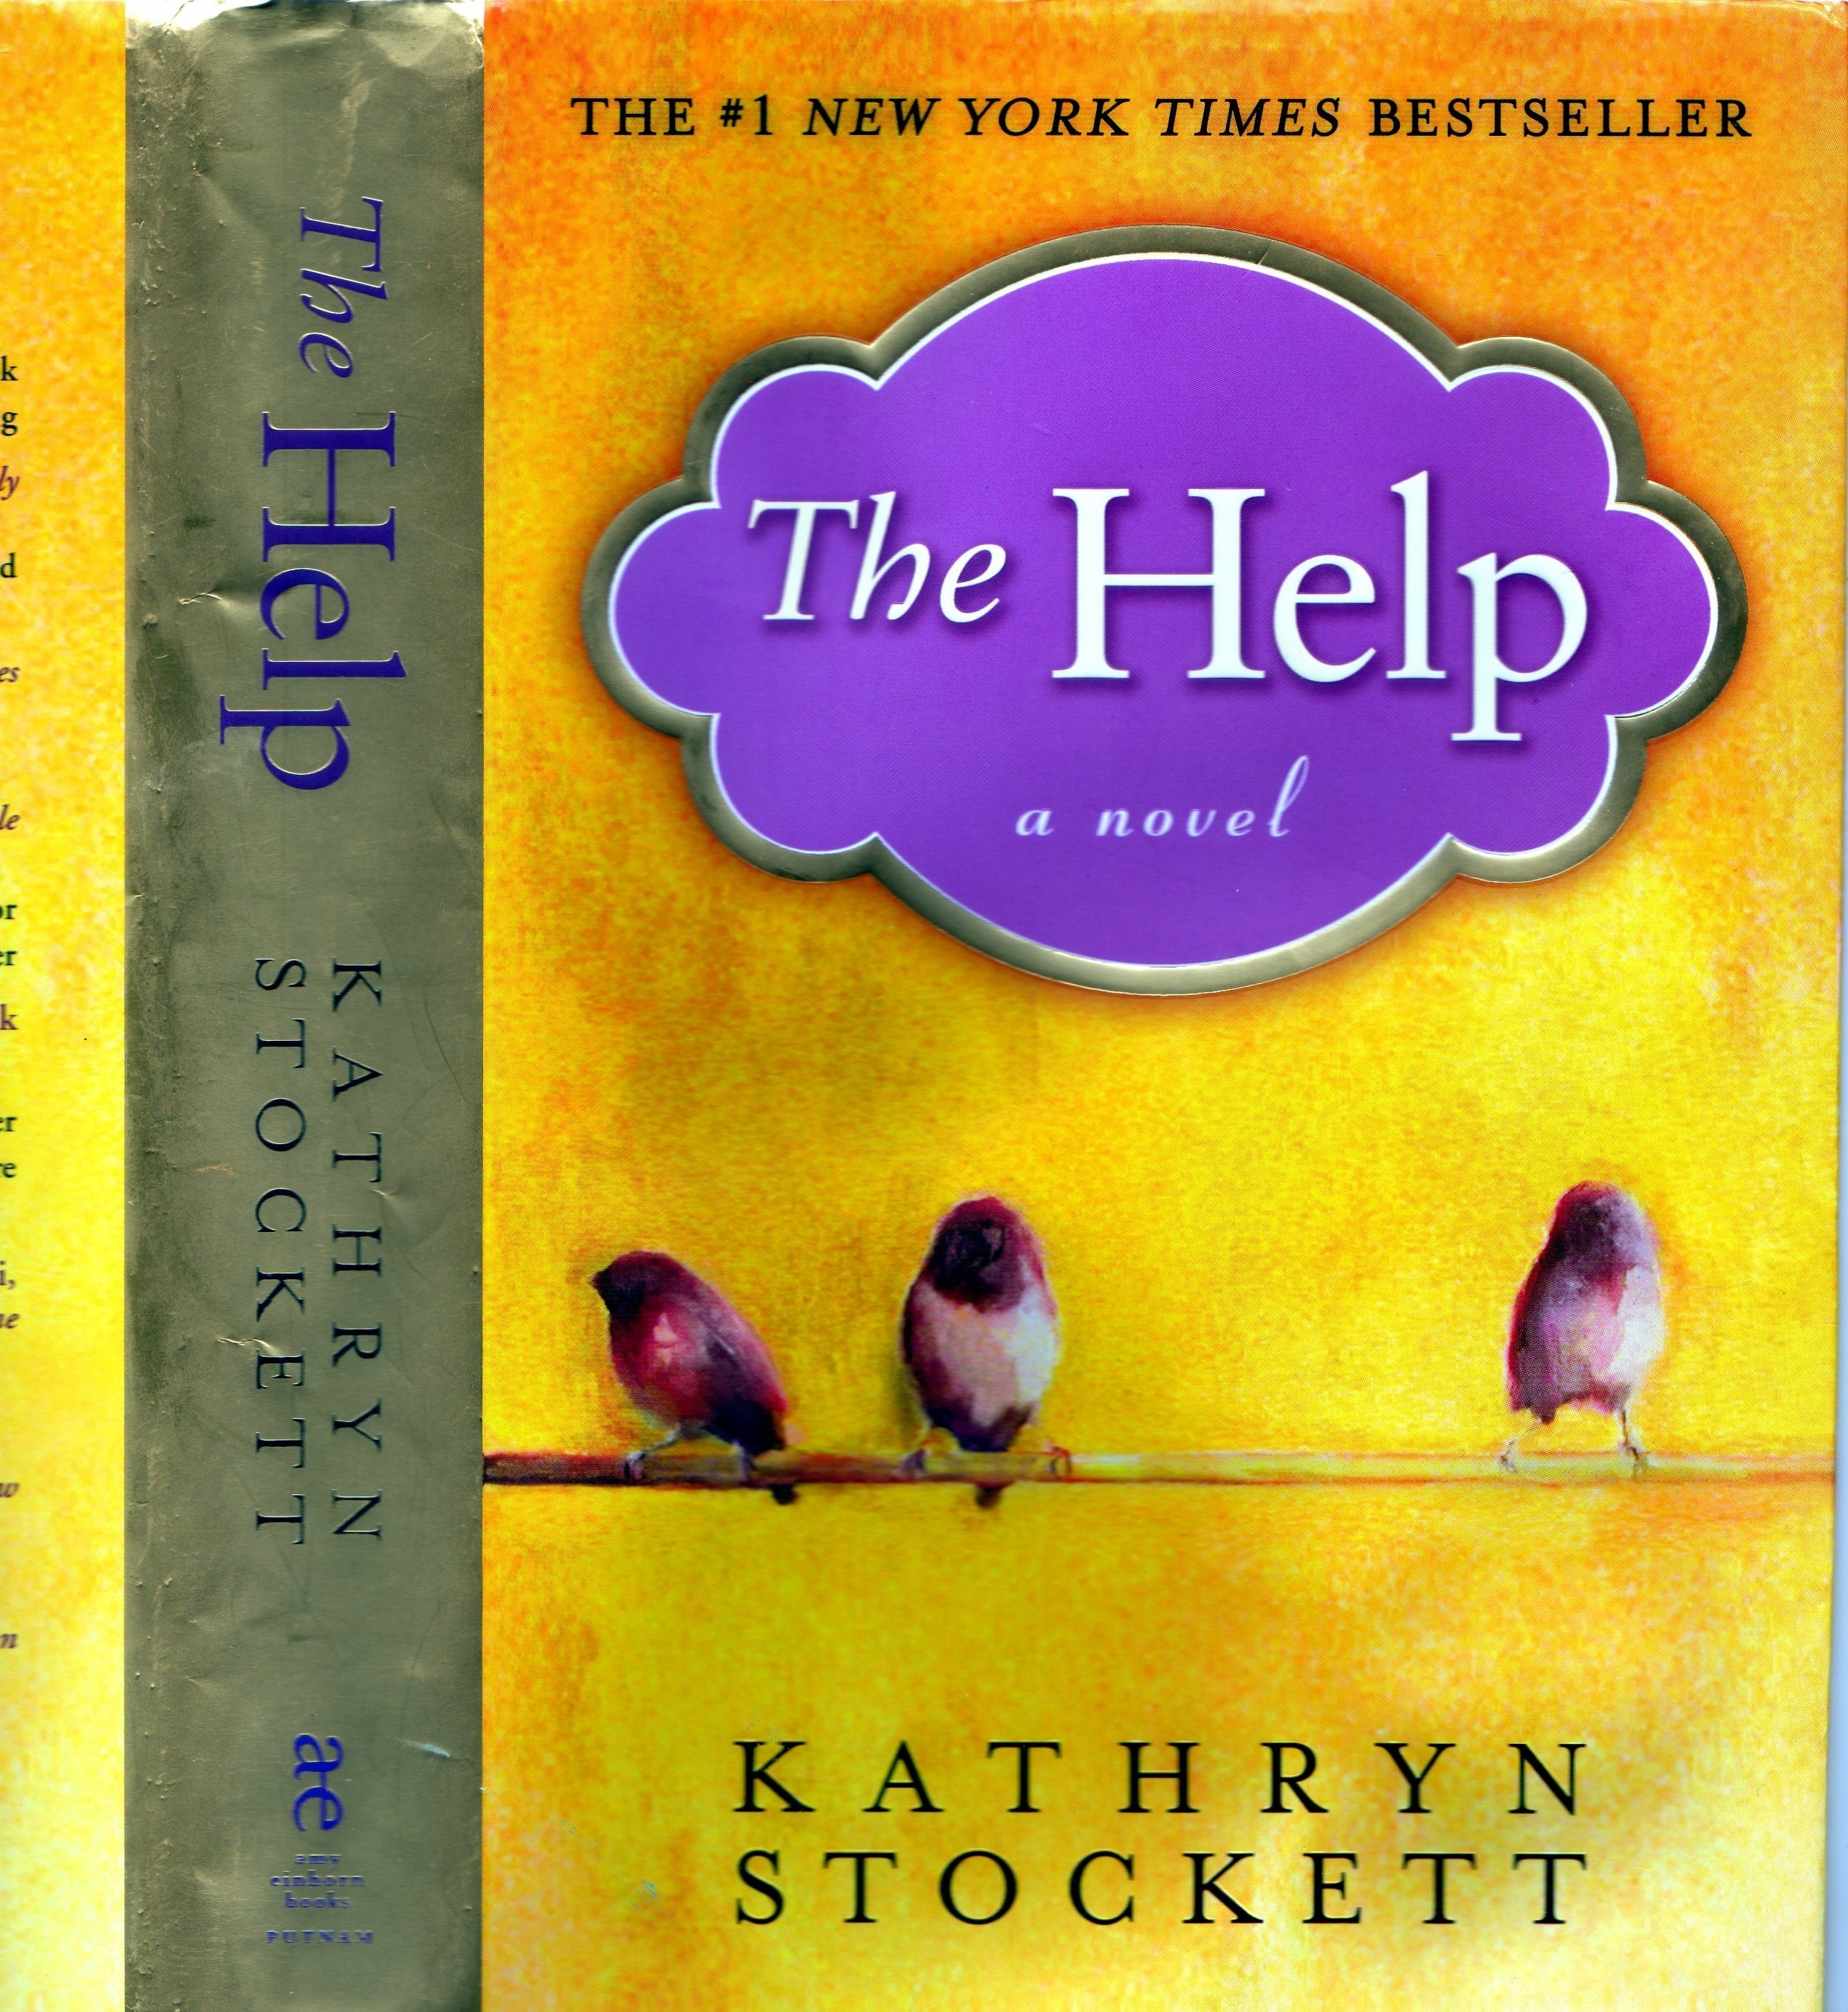 Essay questions for the help by kathryn stockett